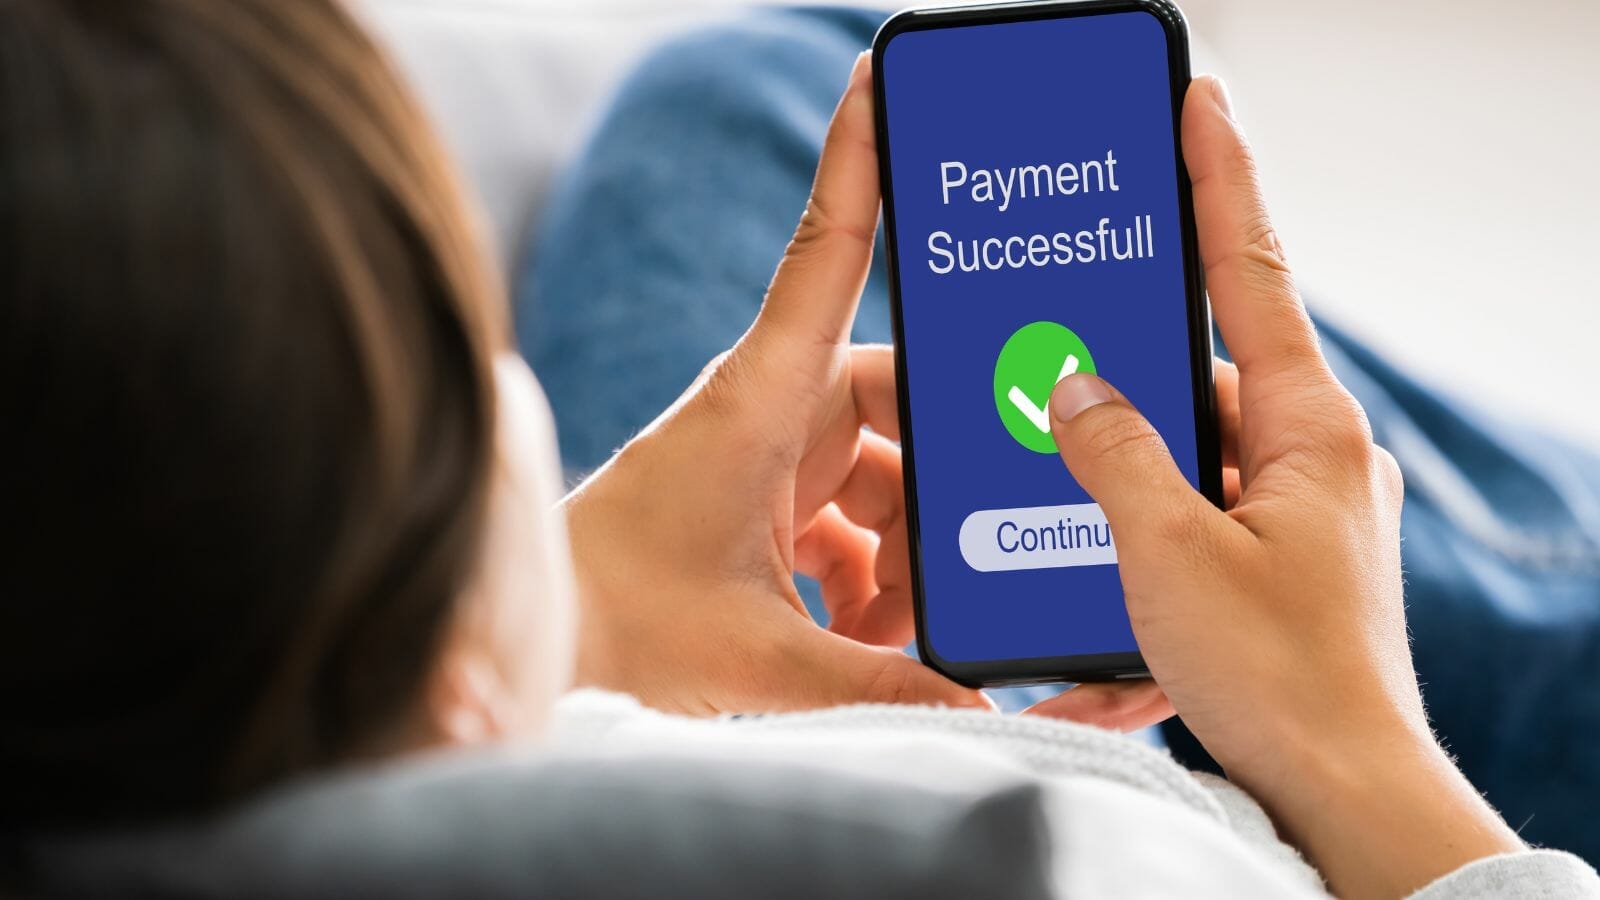 A person holding a phone that says payment successful

Description automatically generated